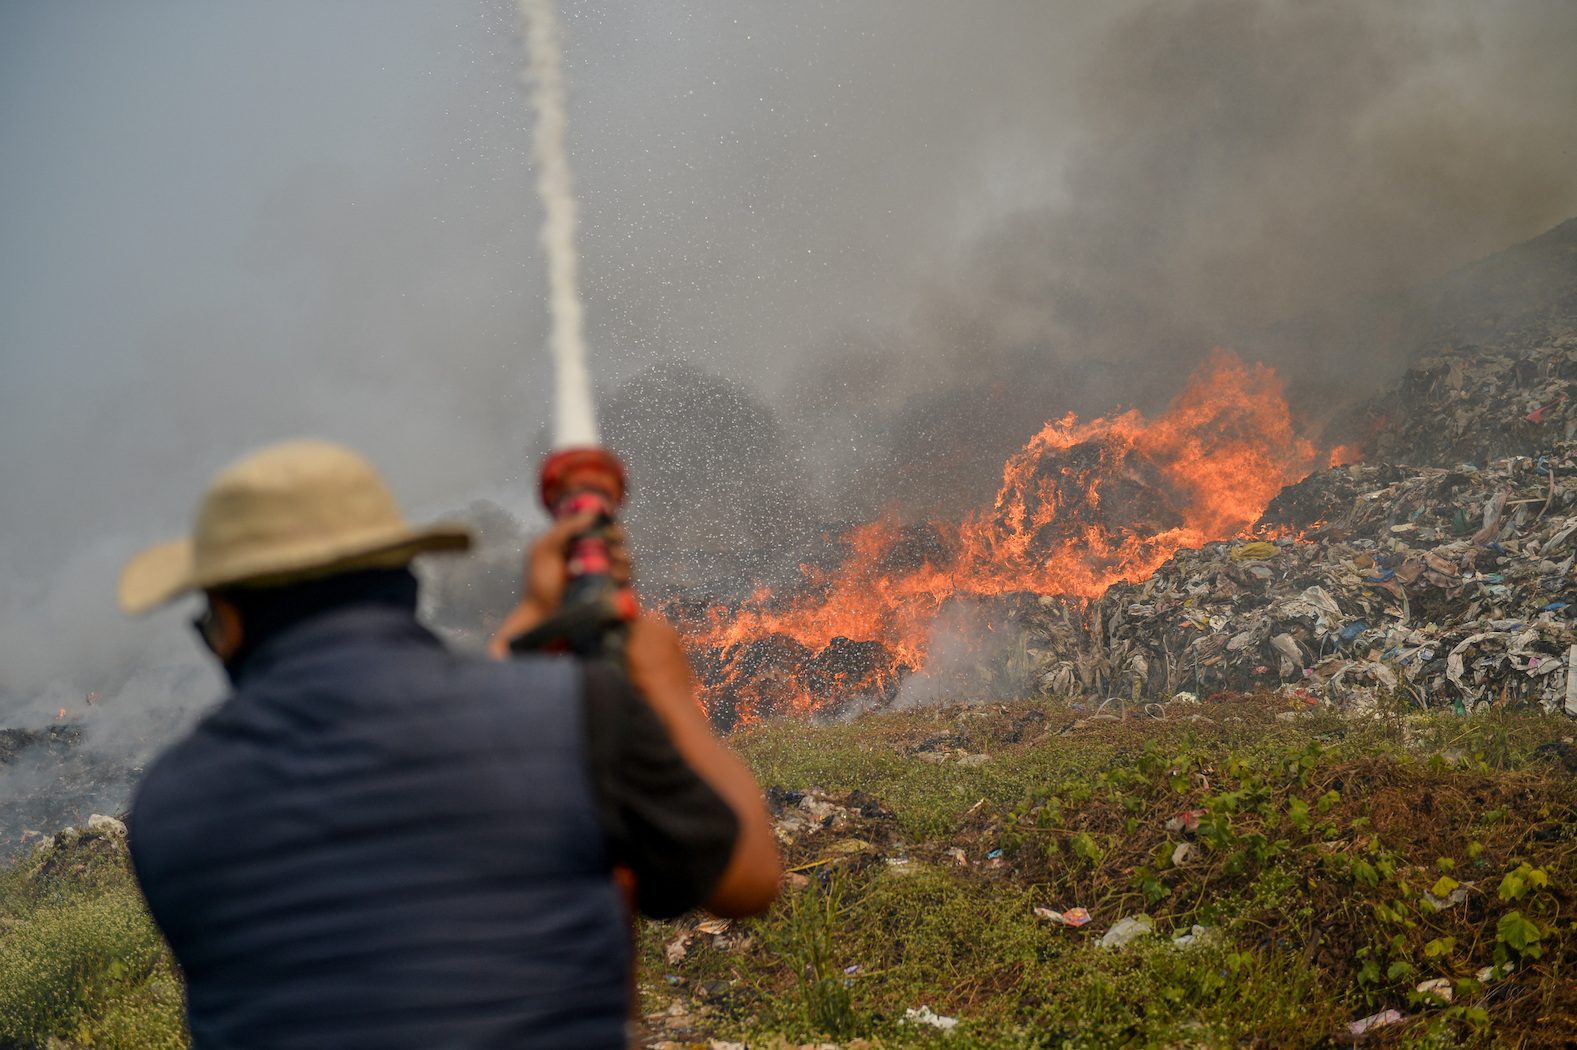 Indonesia fire burns 15 hectares of landfill, still rages